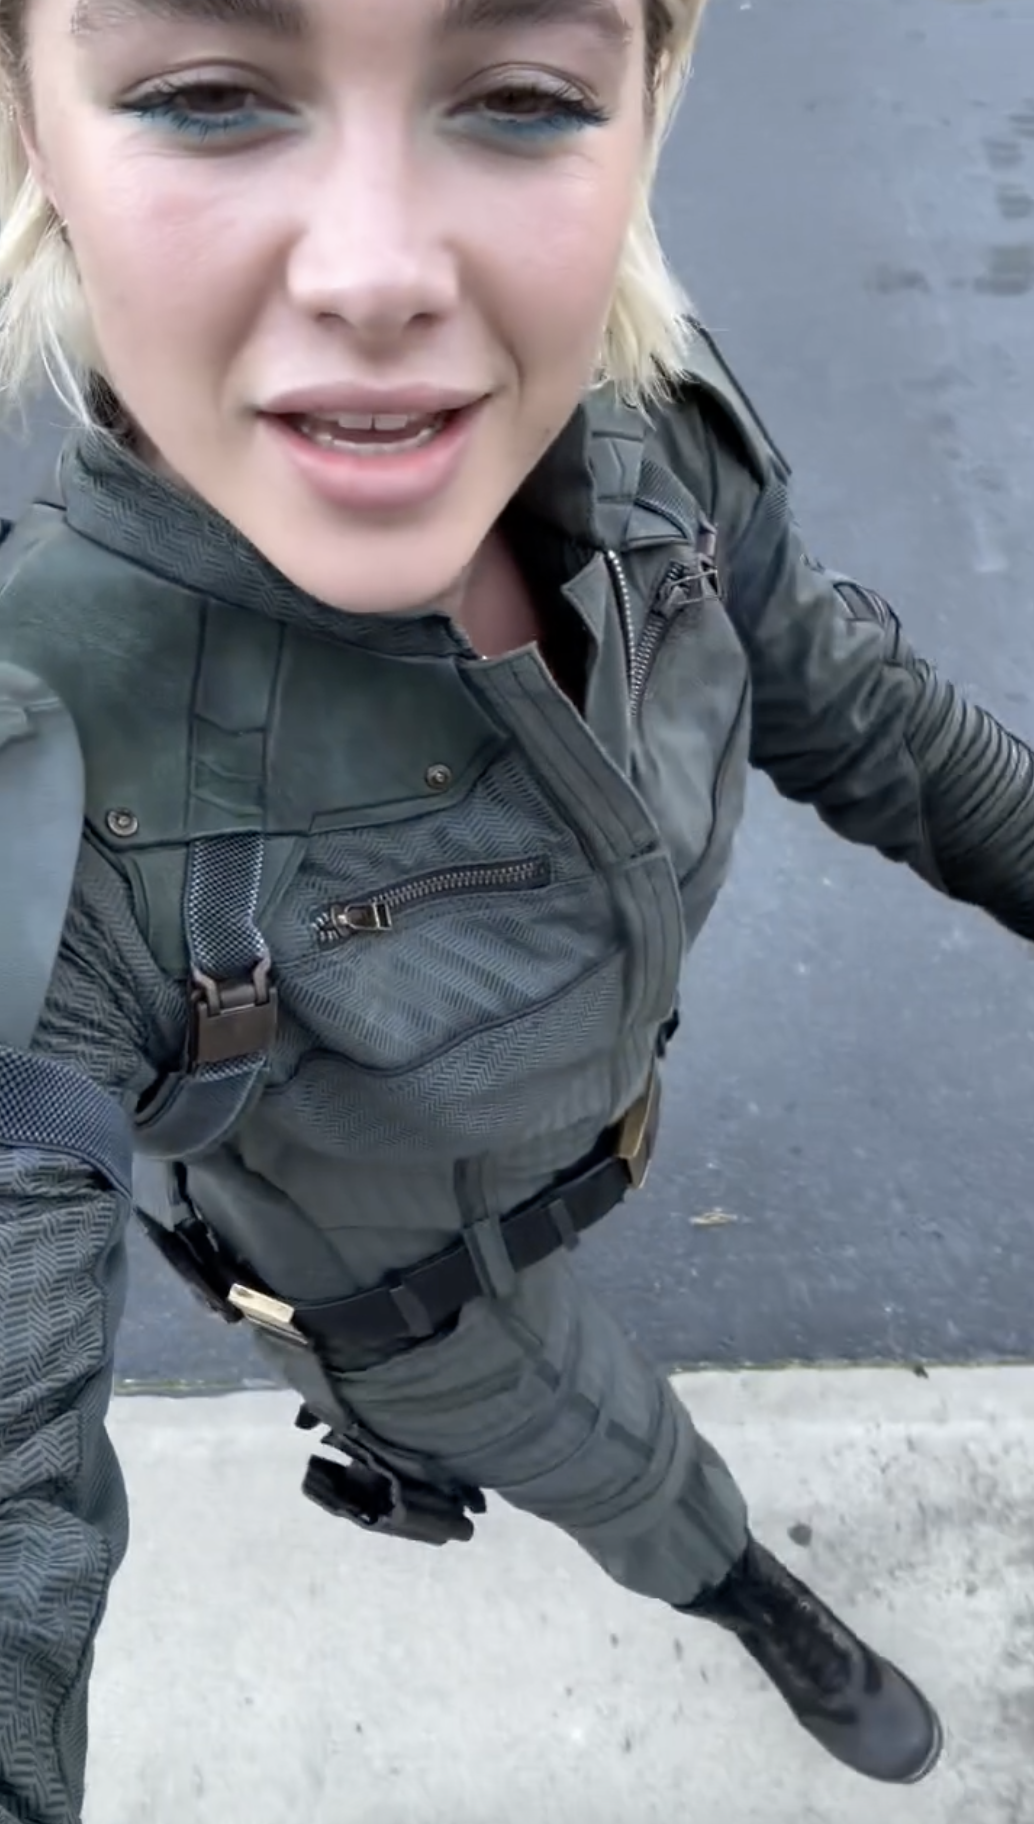 Florence Pugh in a tactical outfit with harness, taking a selfie